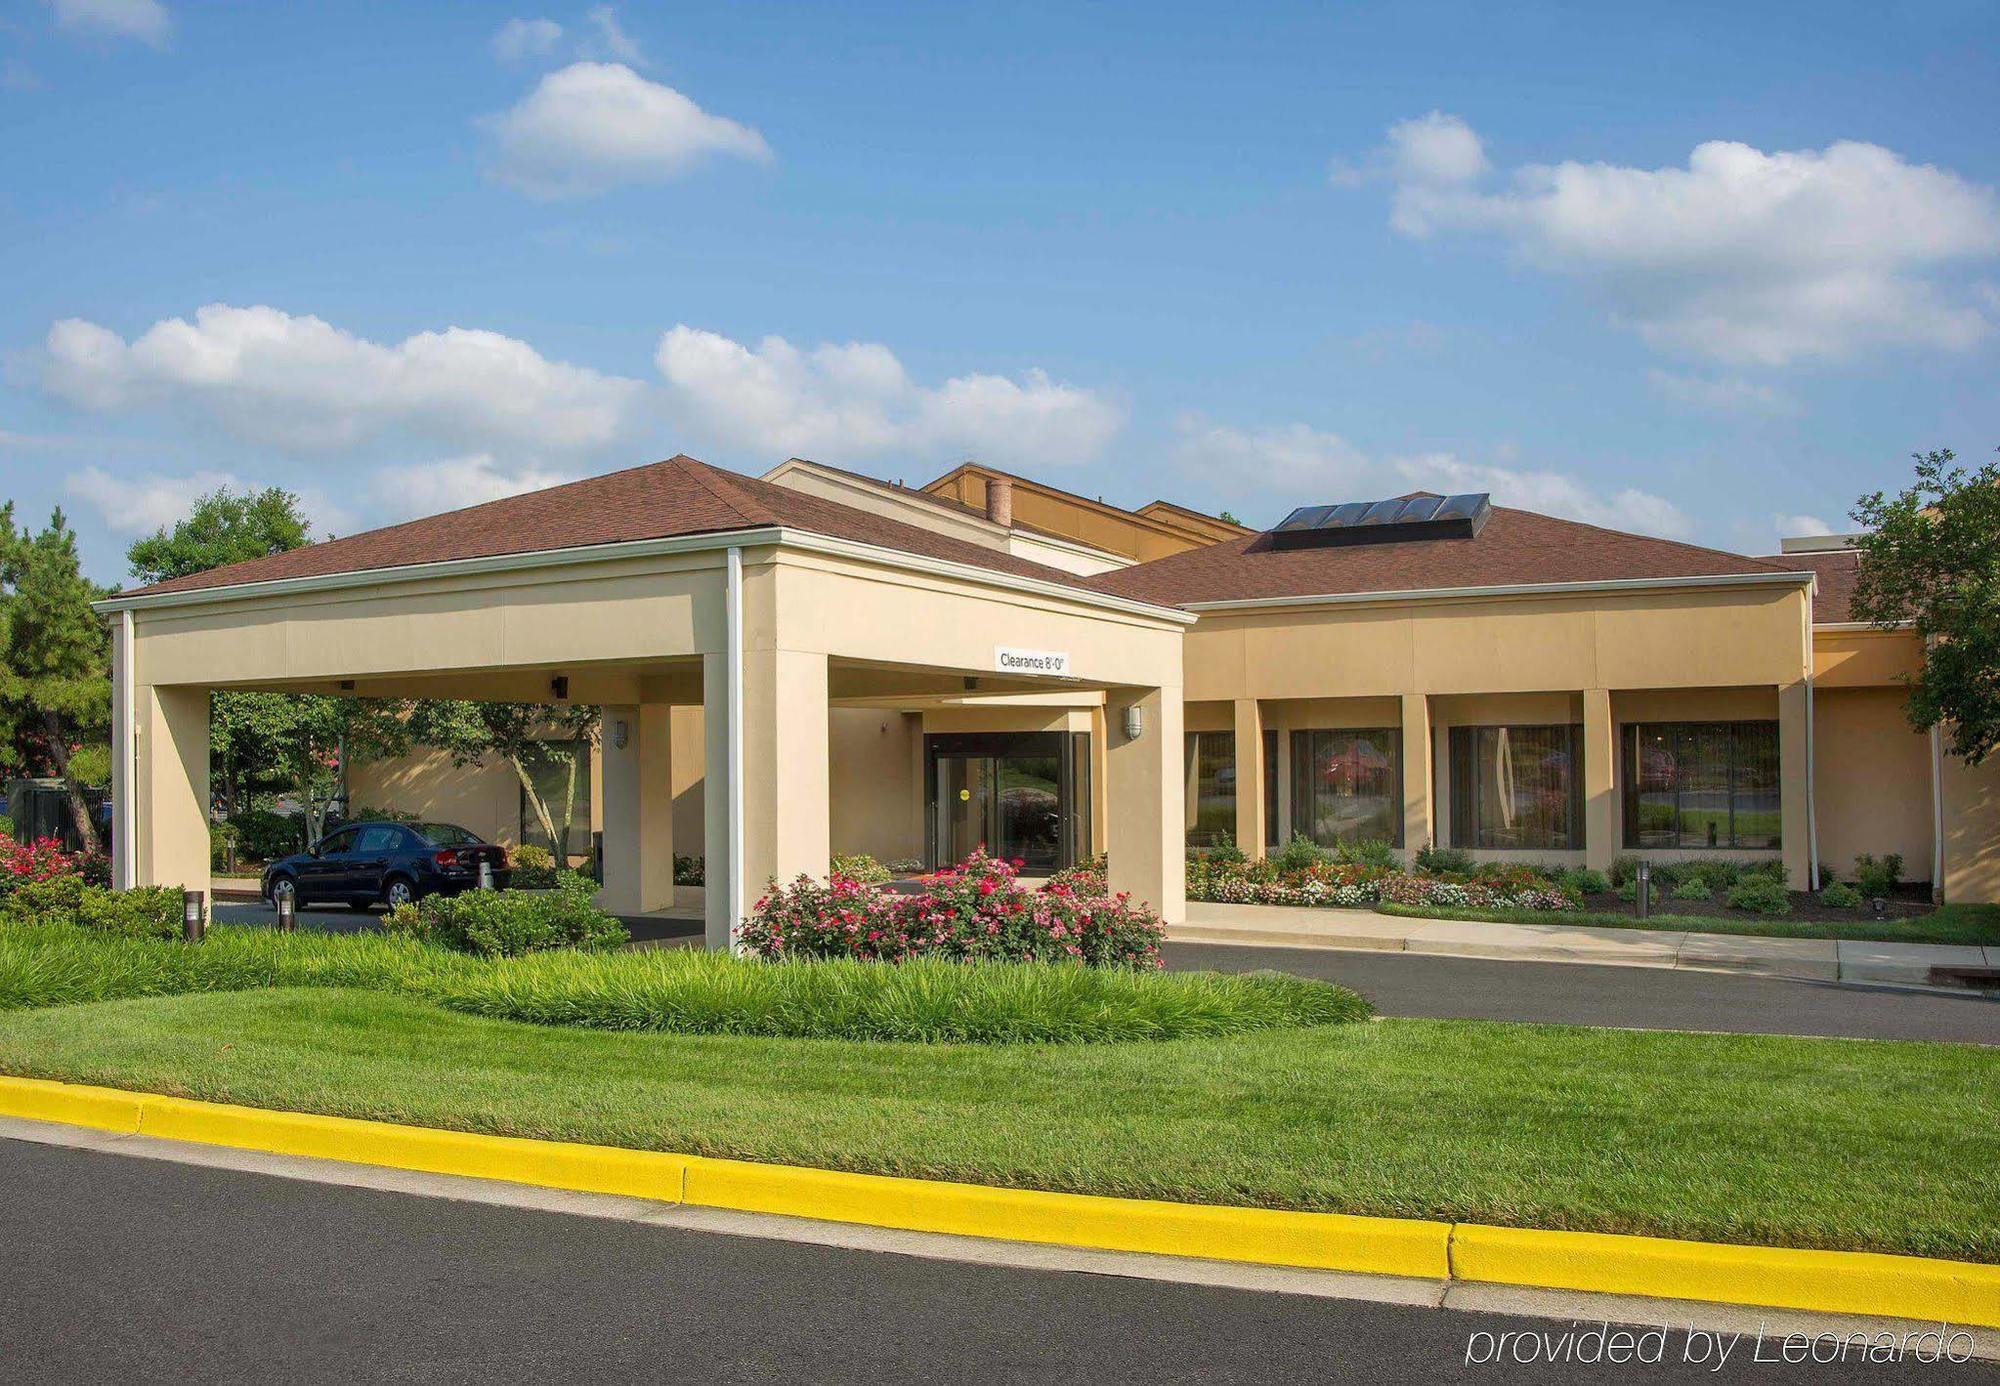 Courtyard By Marriott Annapolis Hotel Exterior photo